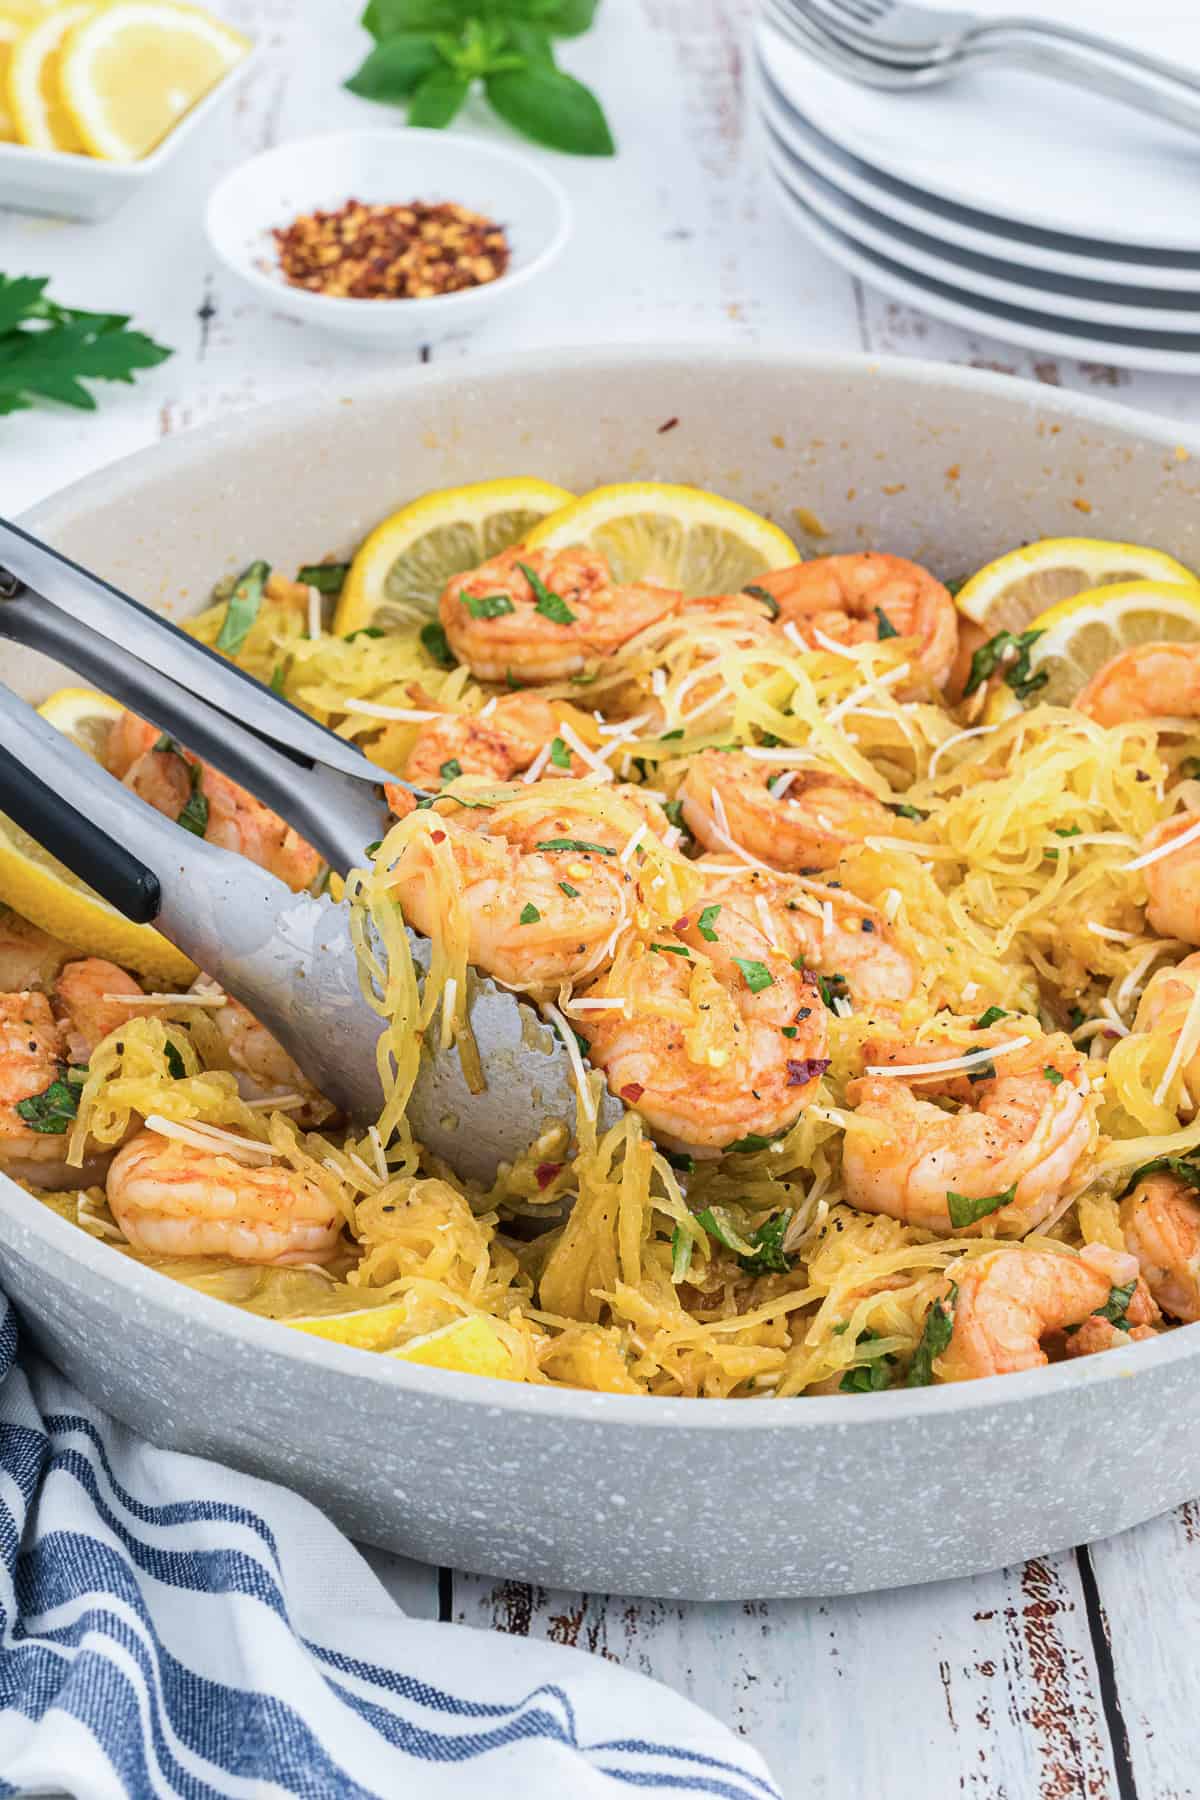 Tongs lift shrimp scampi with spaghetti squash from a skillet.